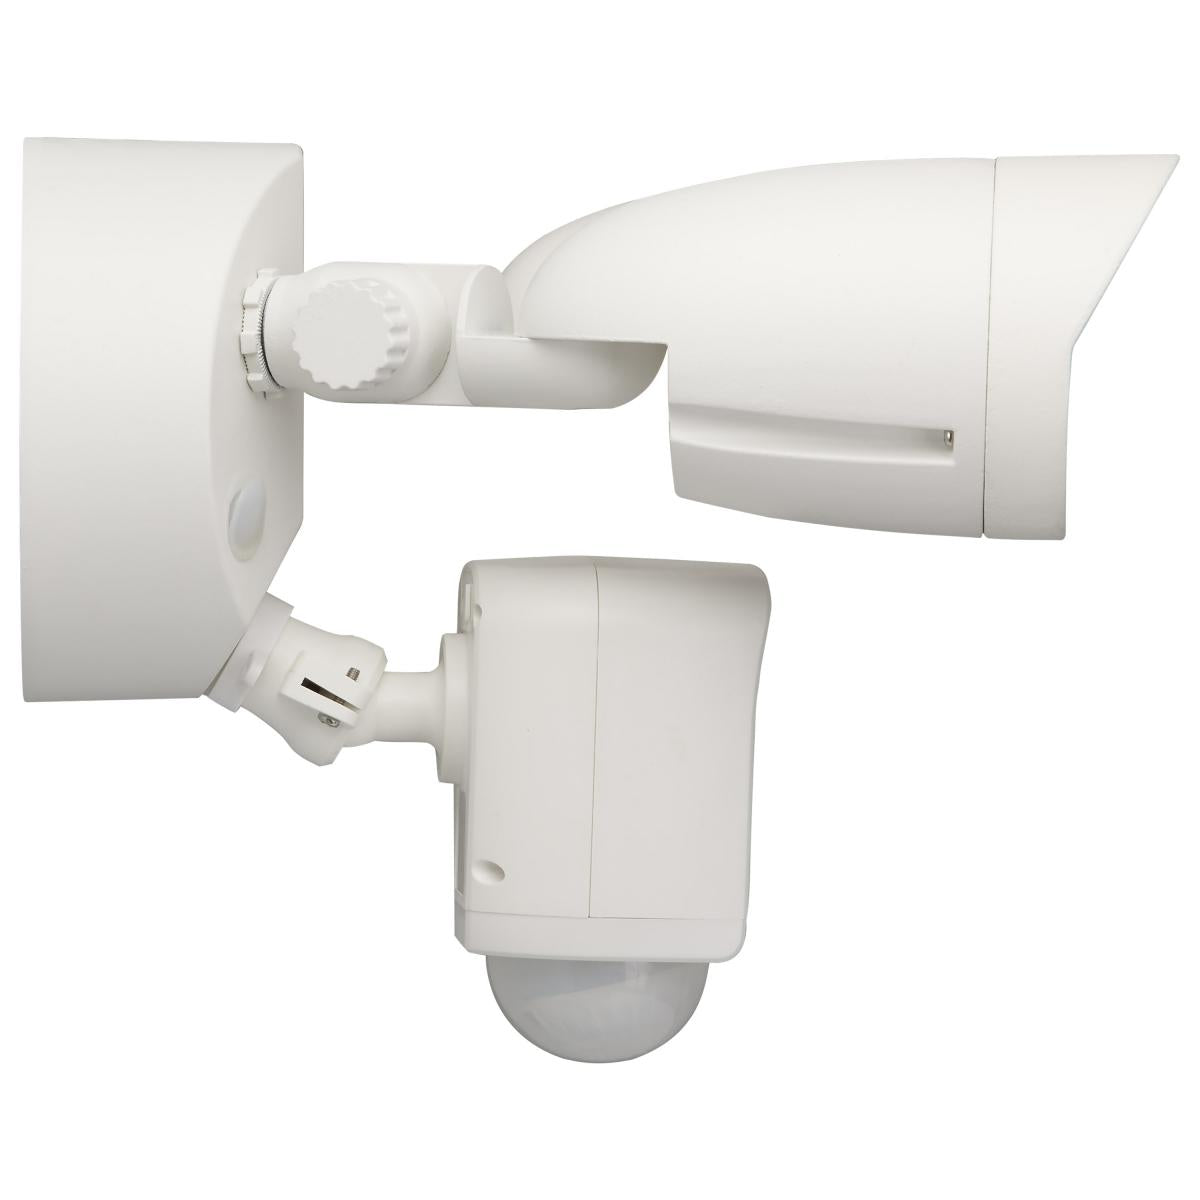 Satco - Bullet Outdoor SMART Security Camera; Starfish enabled;